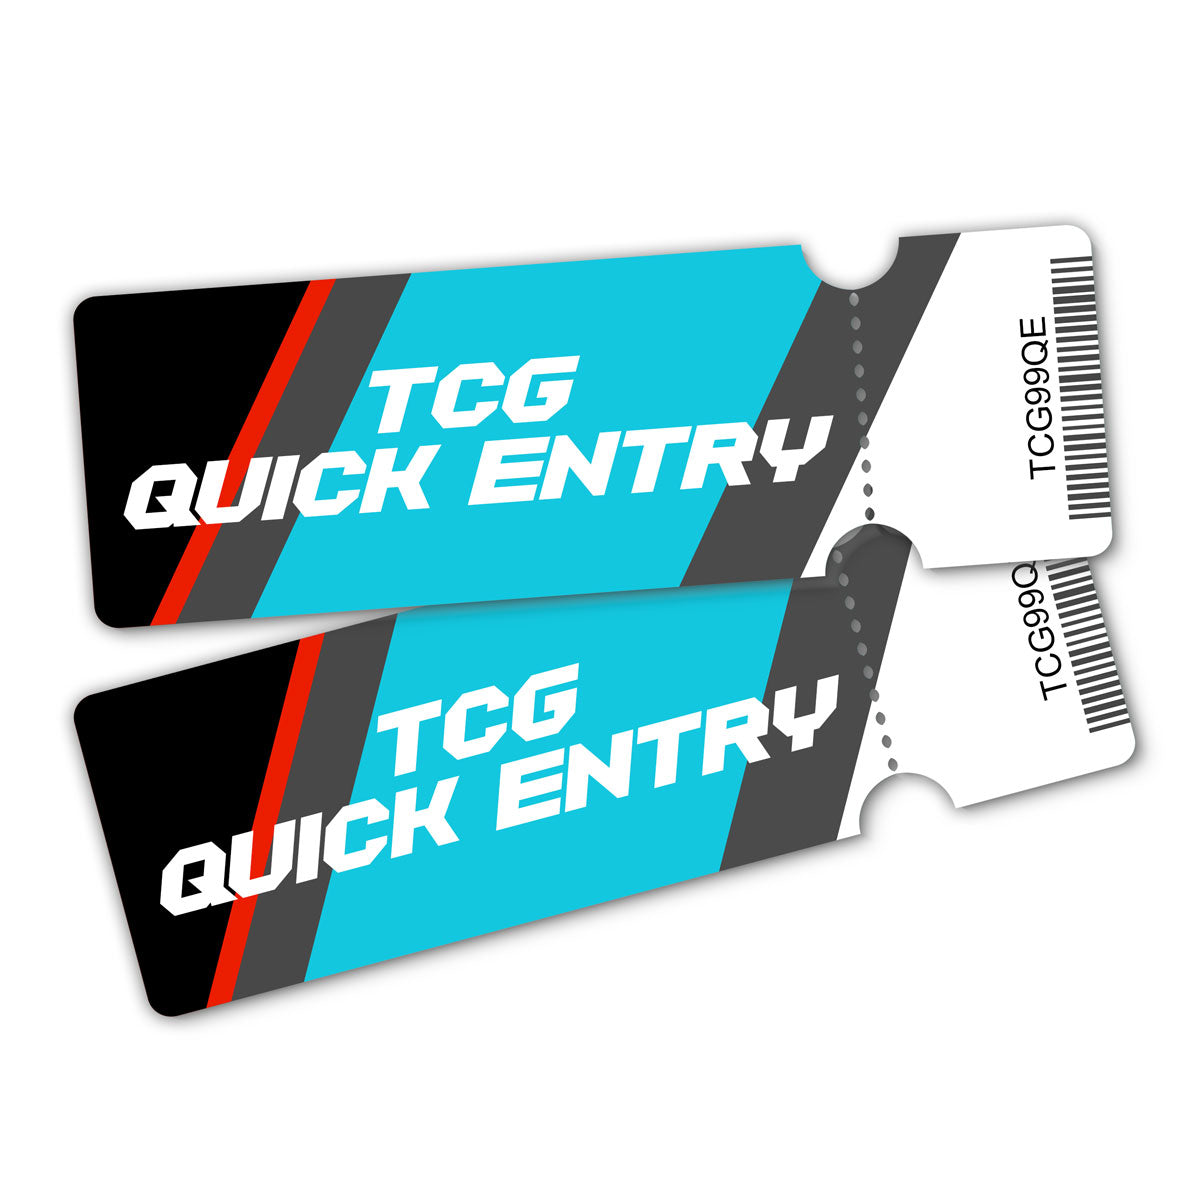 QUICK ENTRY - TCG